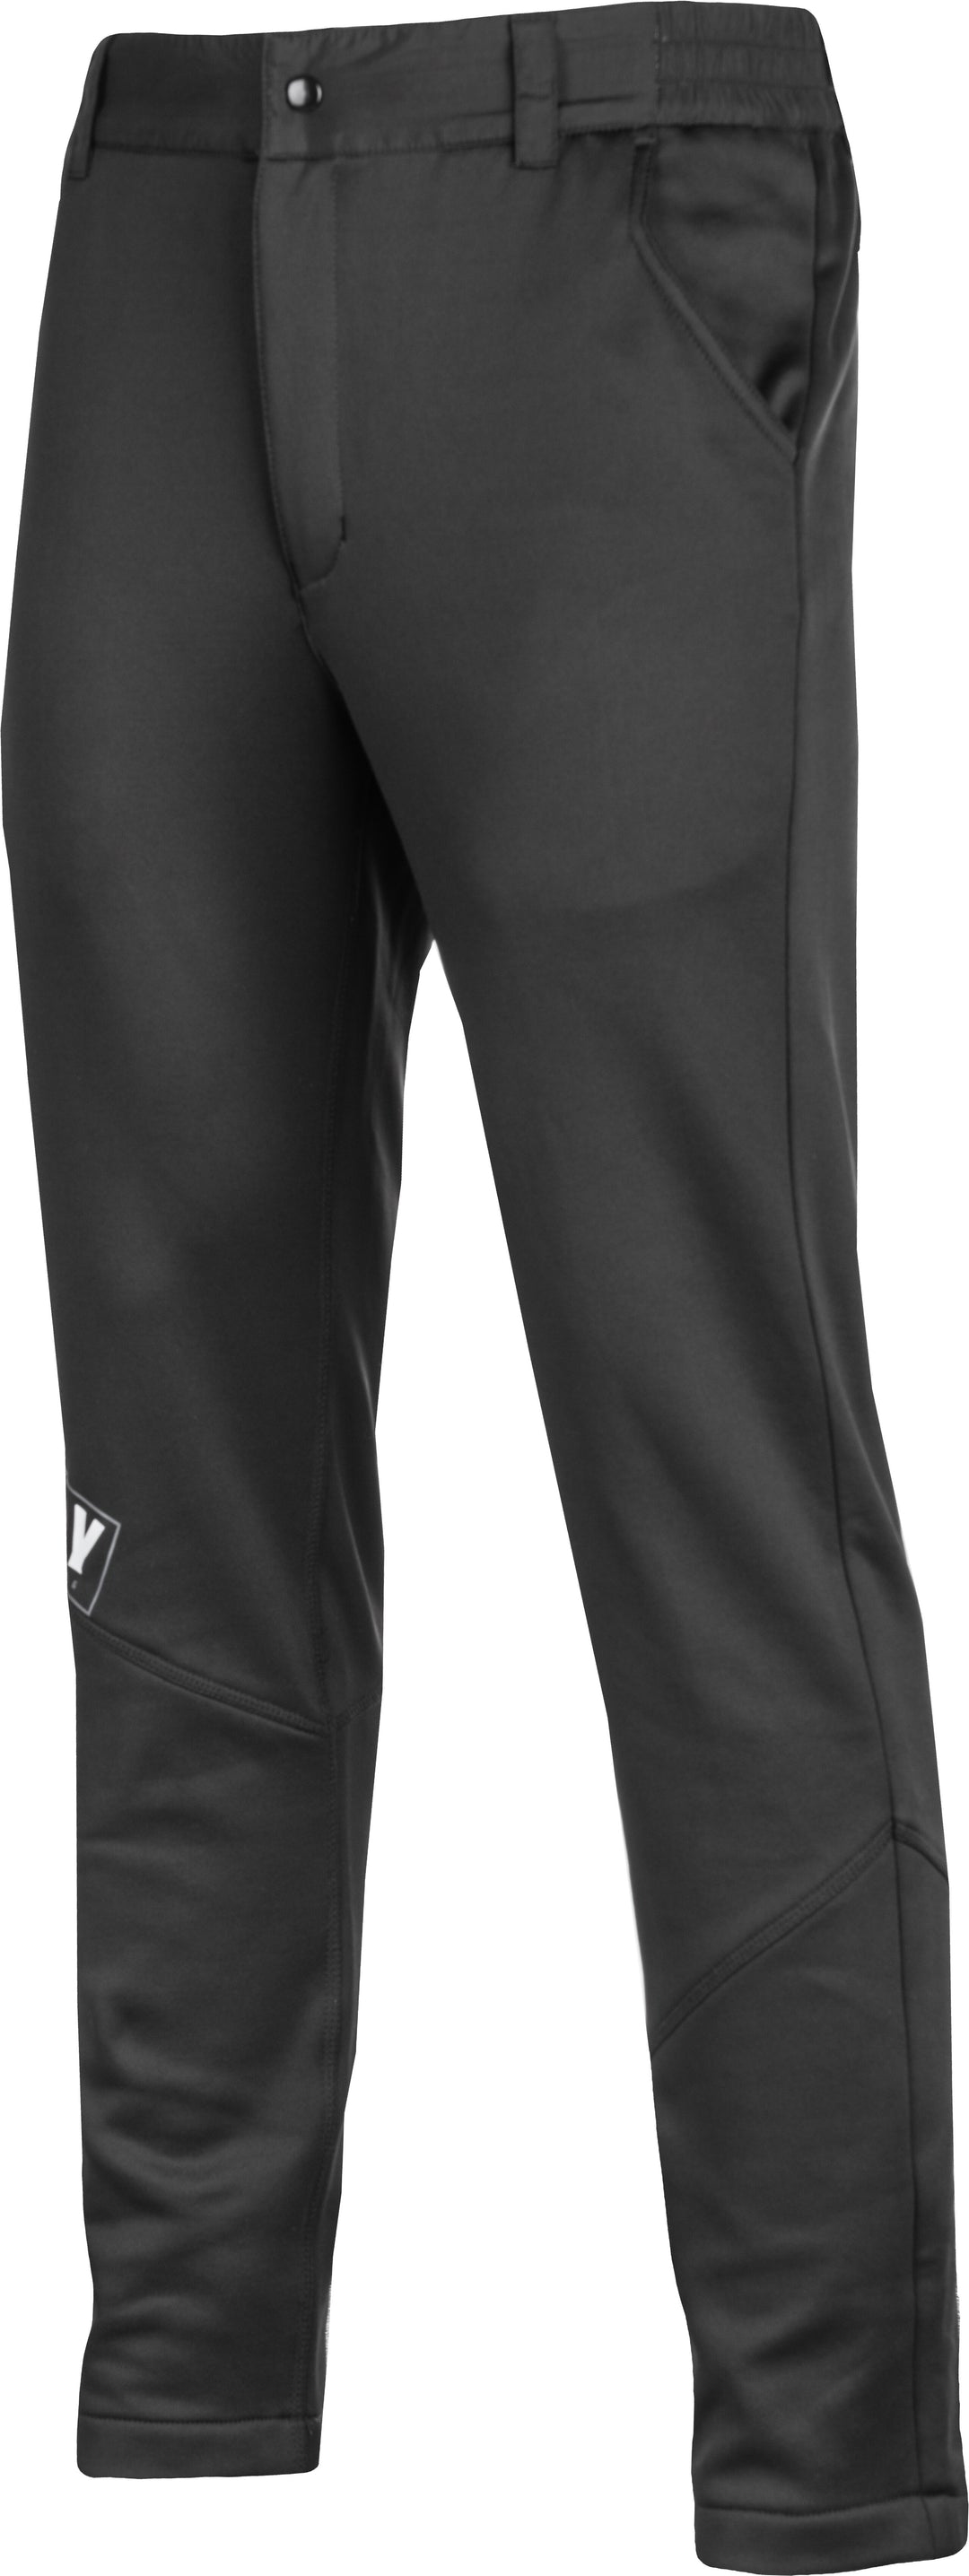 FLY Mid-Layer Pants